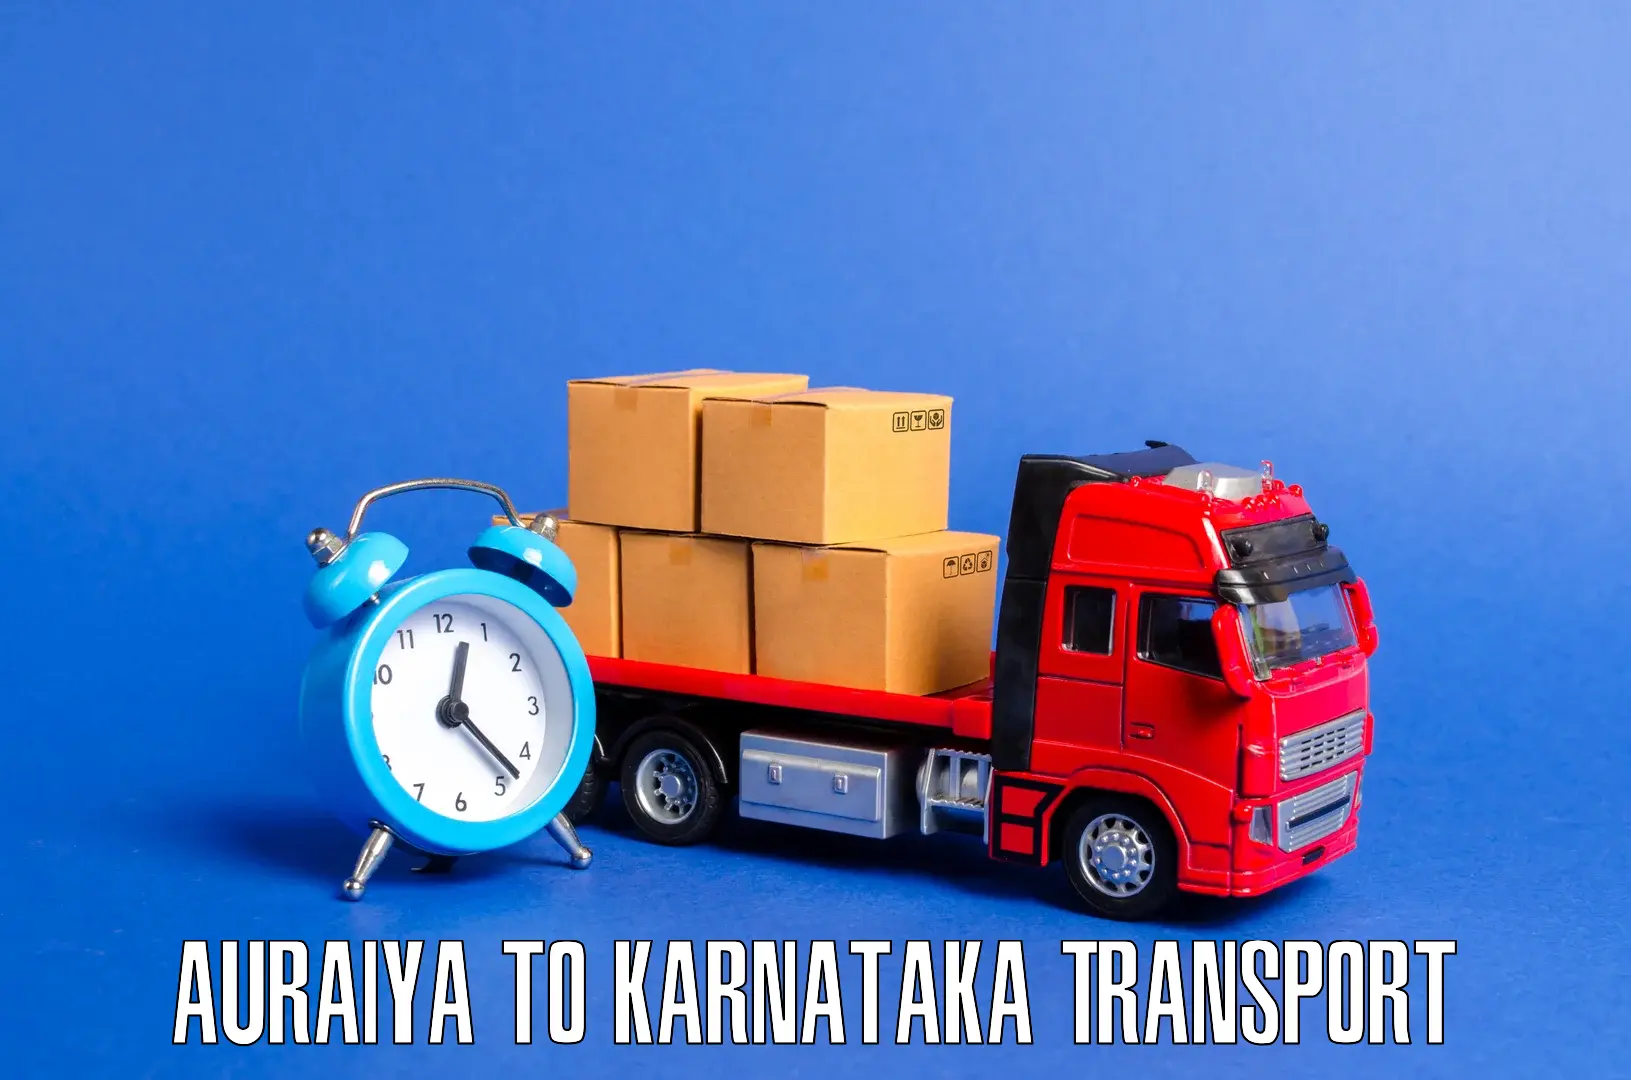 Commercial transport service Auraiya to Mulbagal